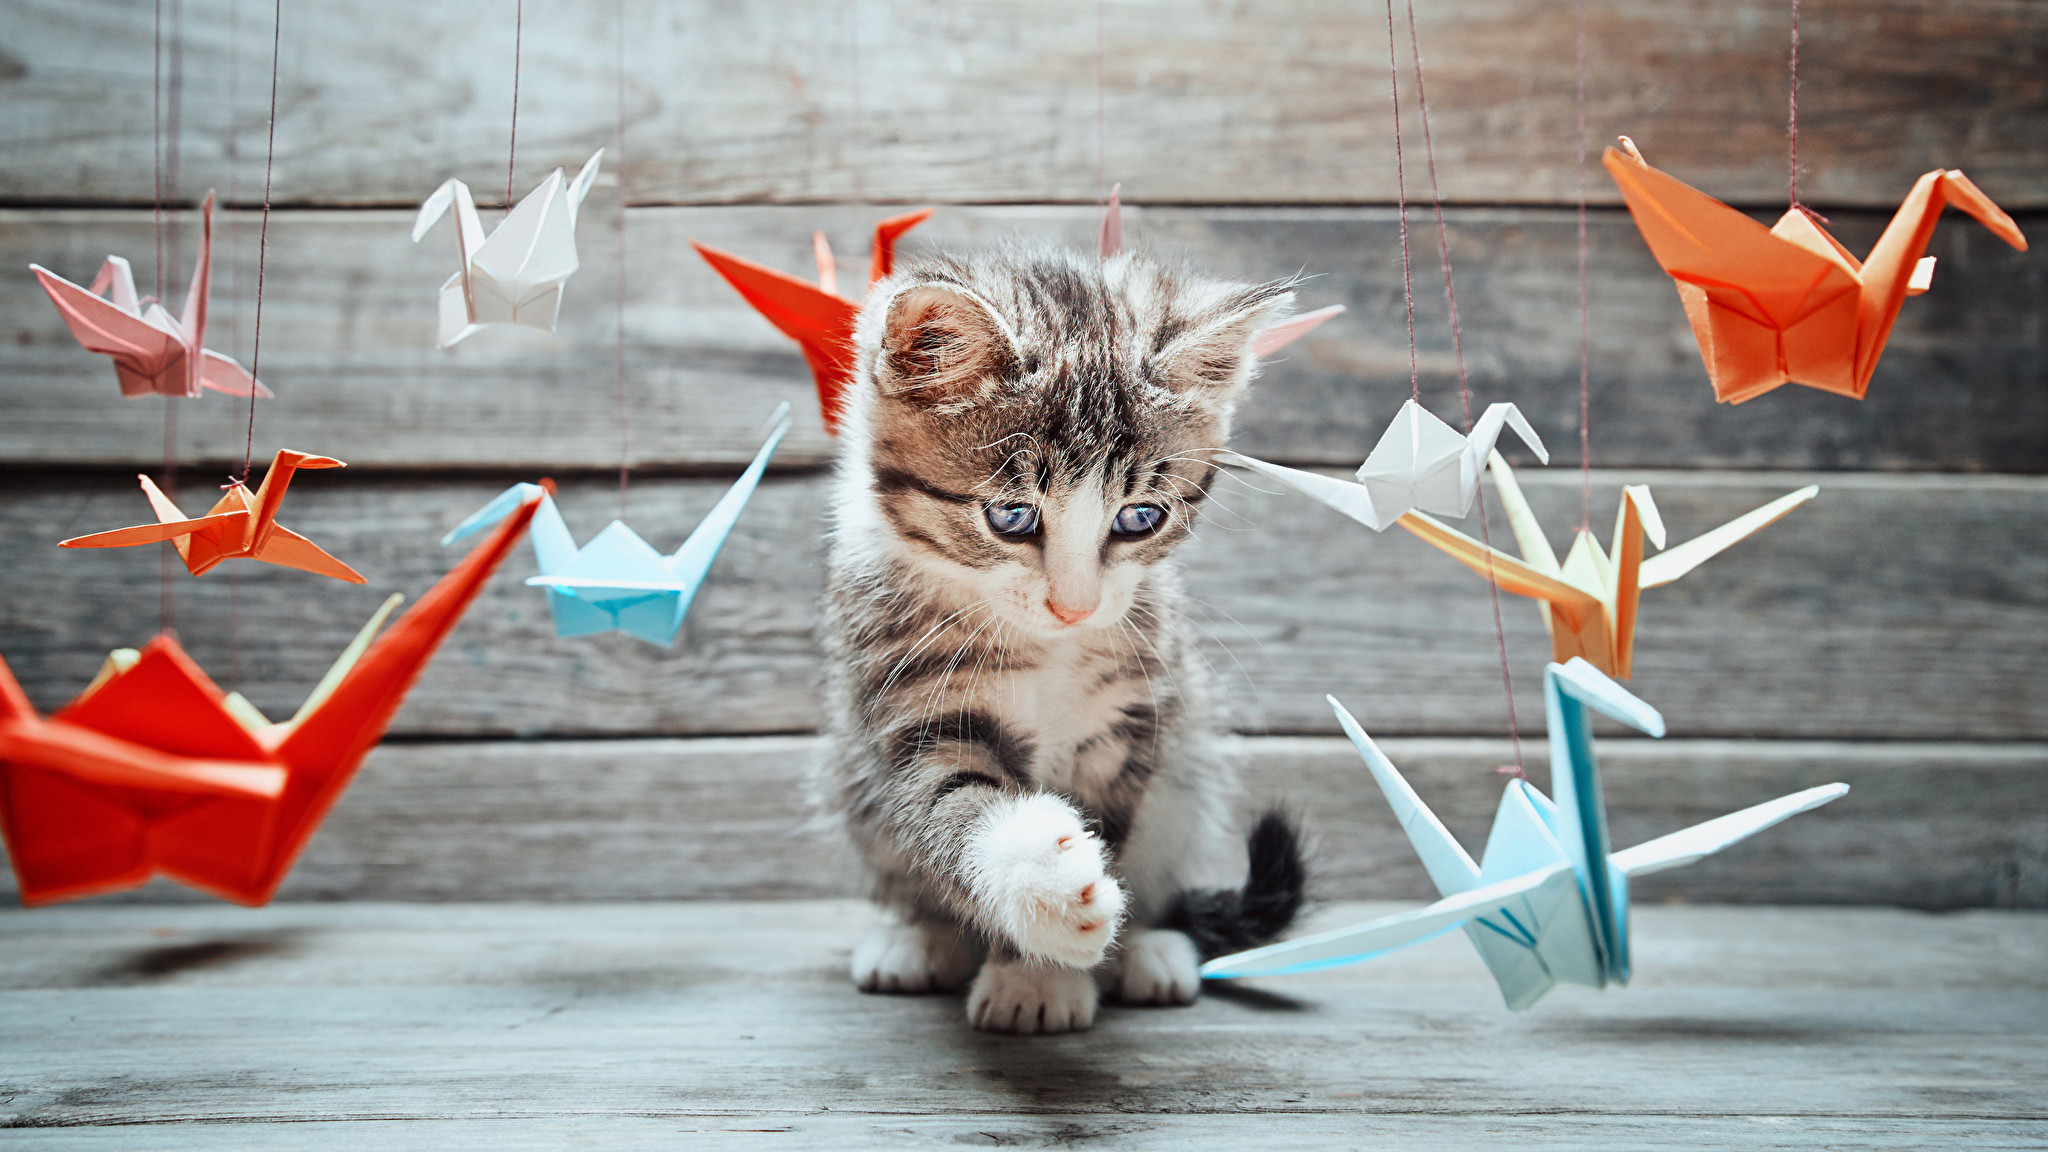 2048x1152 Wallpapers kitty cat Cats paper cranes Animals  Kittens